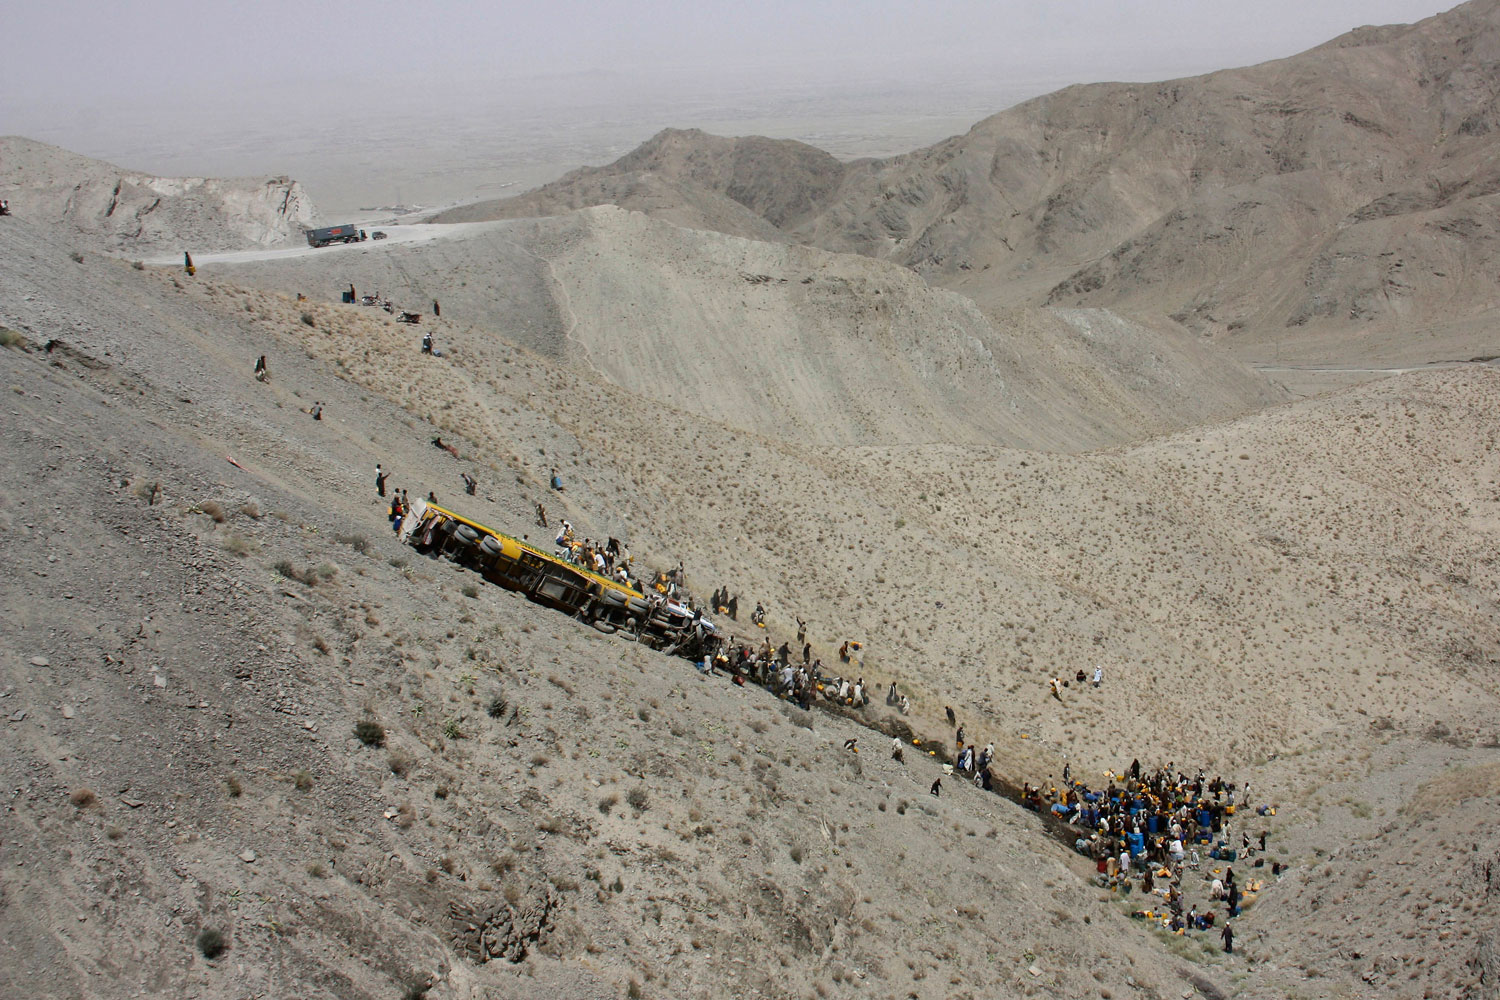 July 12, 2011. Local people rush to collect oil spilled from an overturned NATO oil tanker in Kojak Pass near Chaman, Pakistan along the Afghanistan border. Oil tankers and trucks carry supplies for the NATO forces in neighboring Afghanistan.